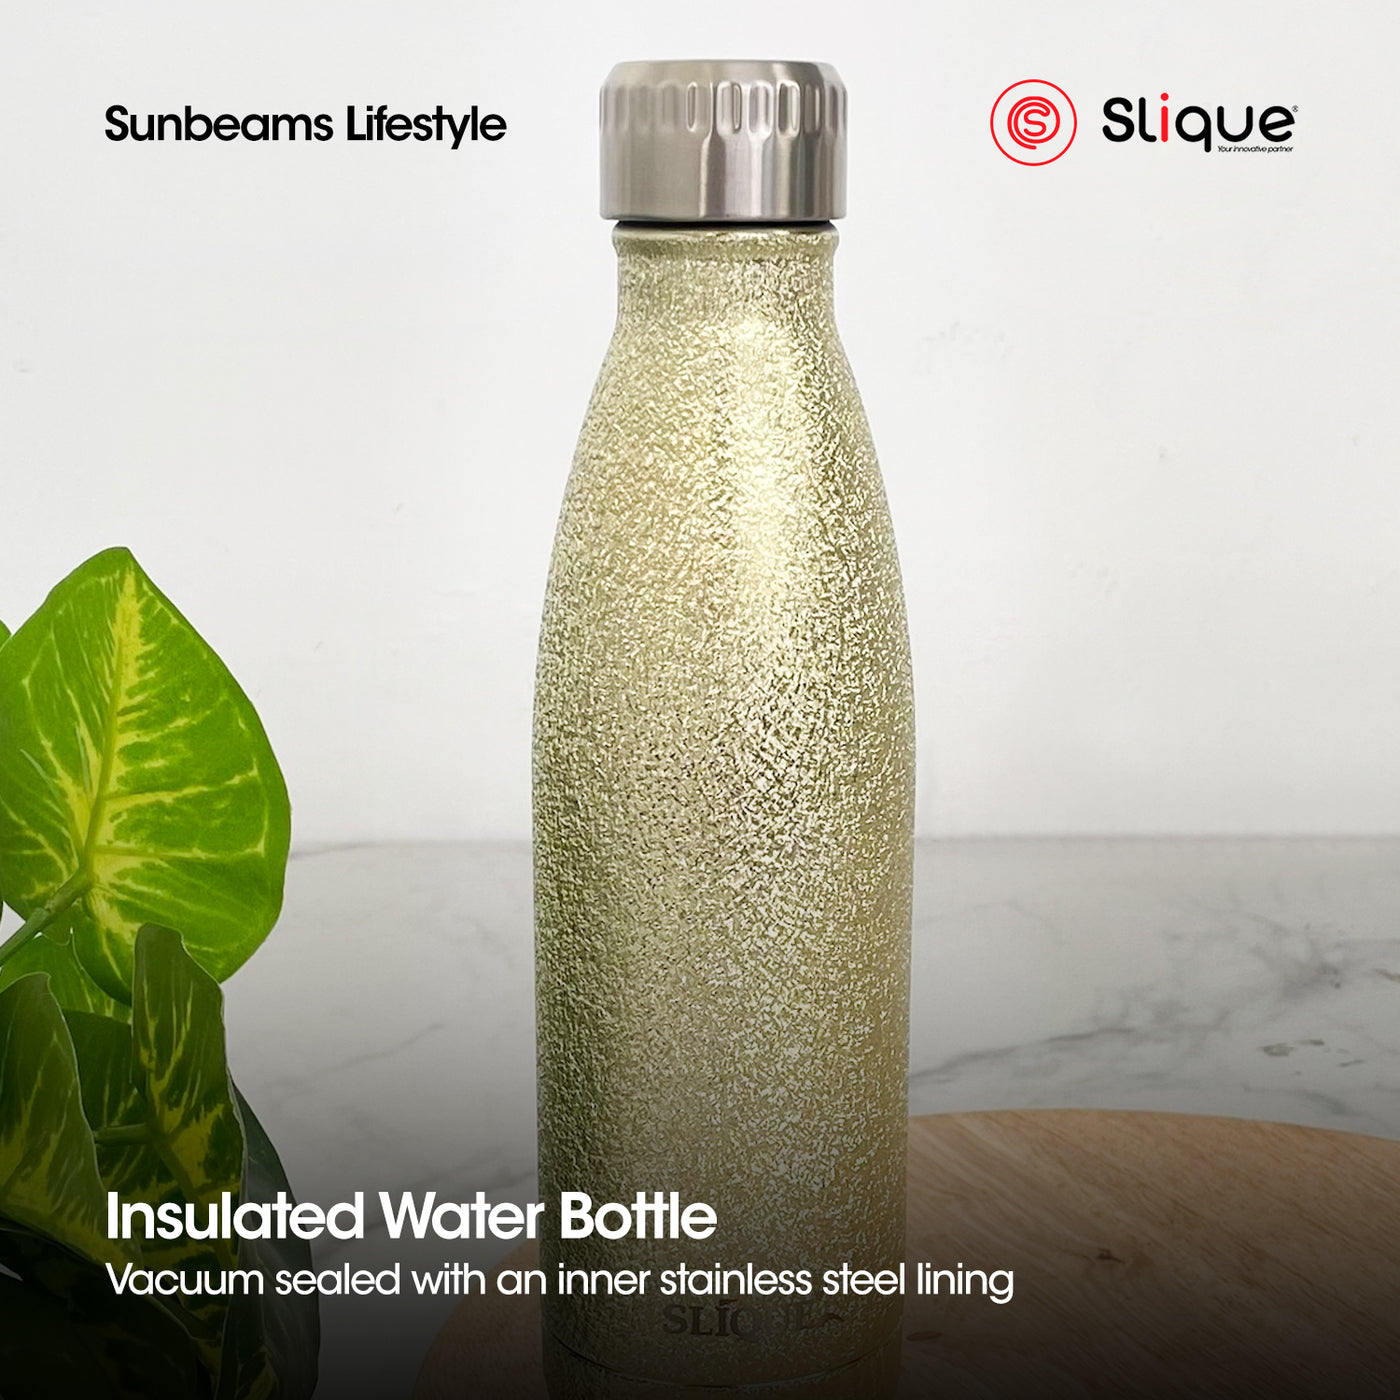 SLIQUE Stainless Steel Glitter Finish Insulated Water Bottle 500ml (Yellow)